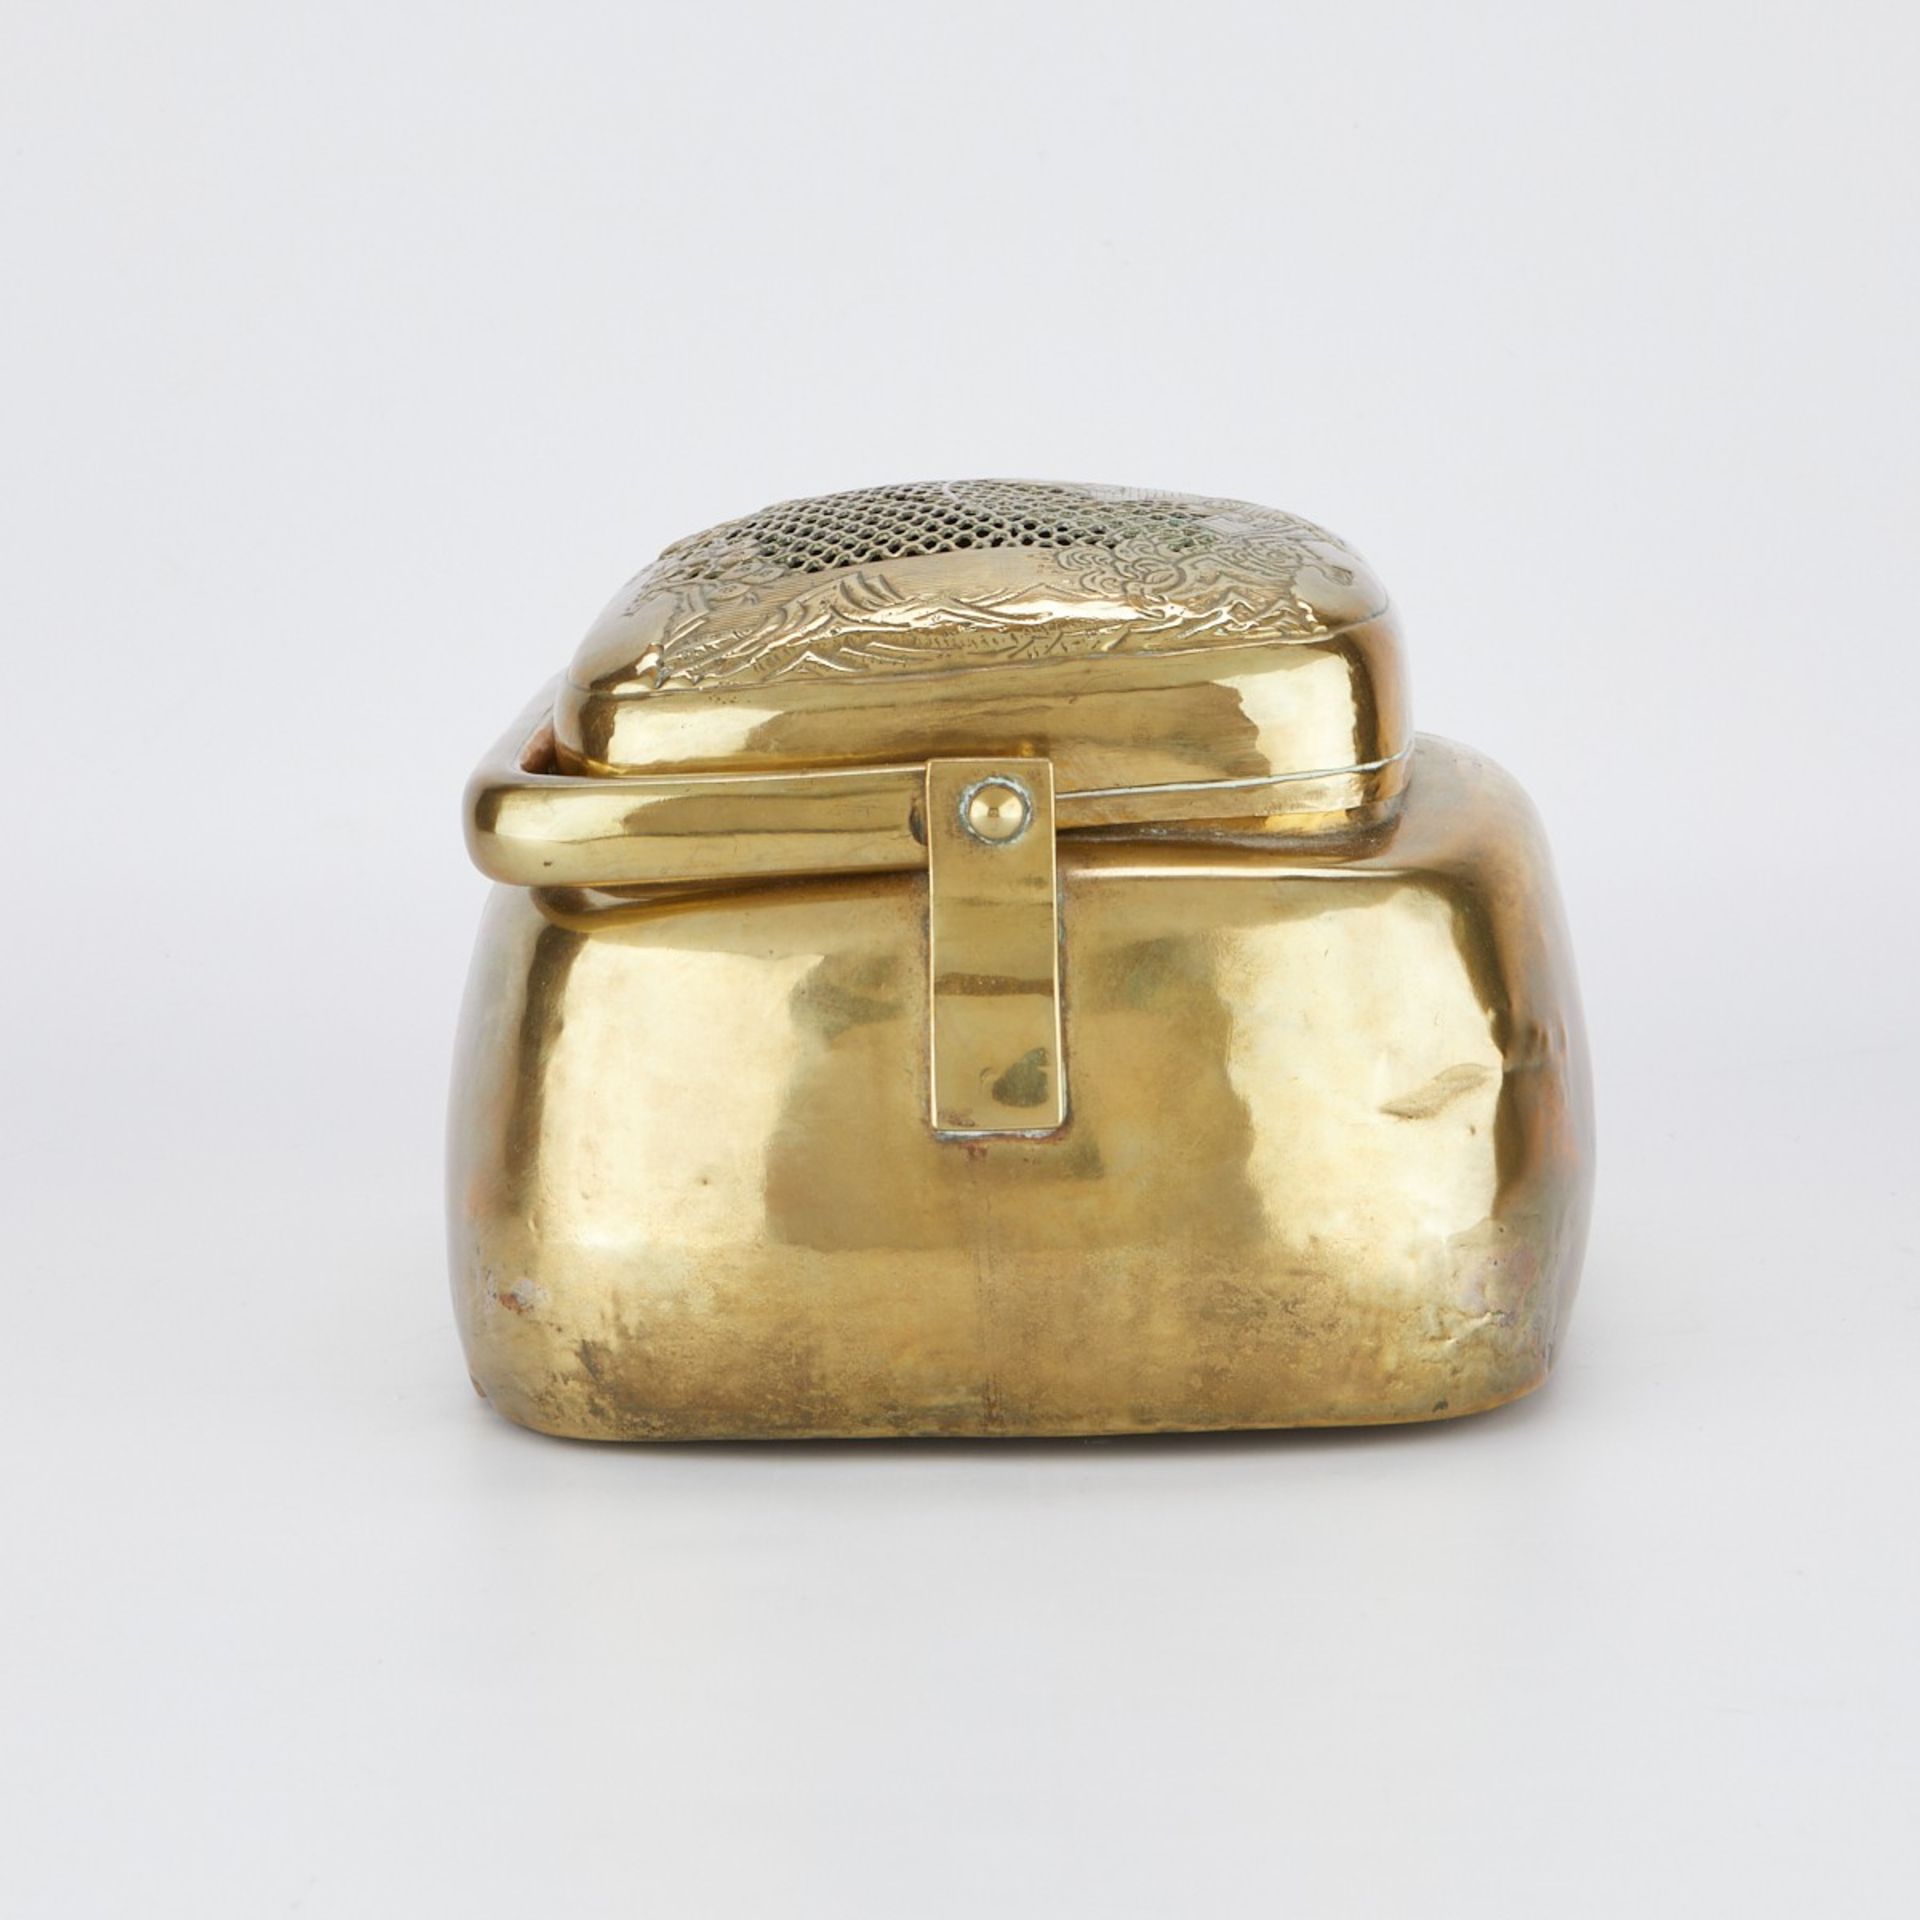 Lrg Chinese Qing Brass Hand Foot Warmer - Image 5 of 8